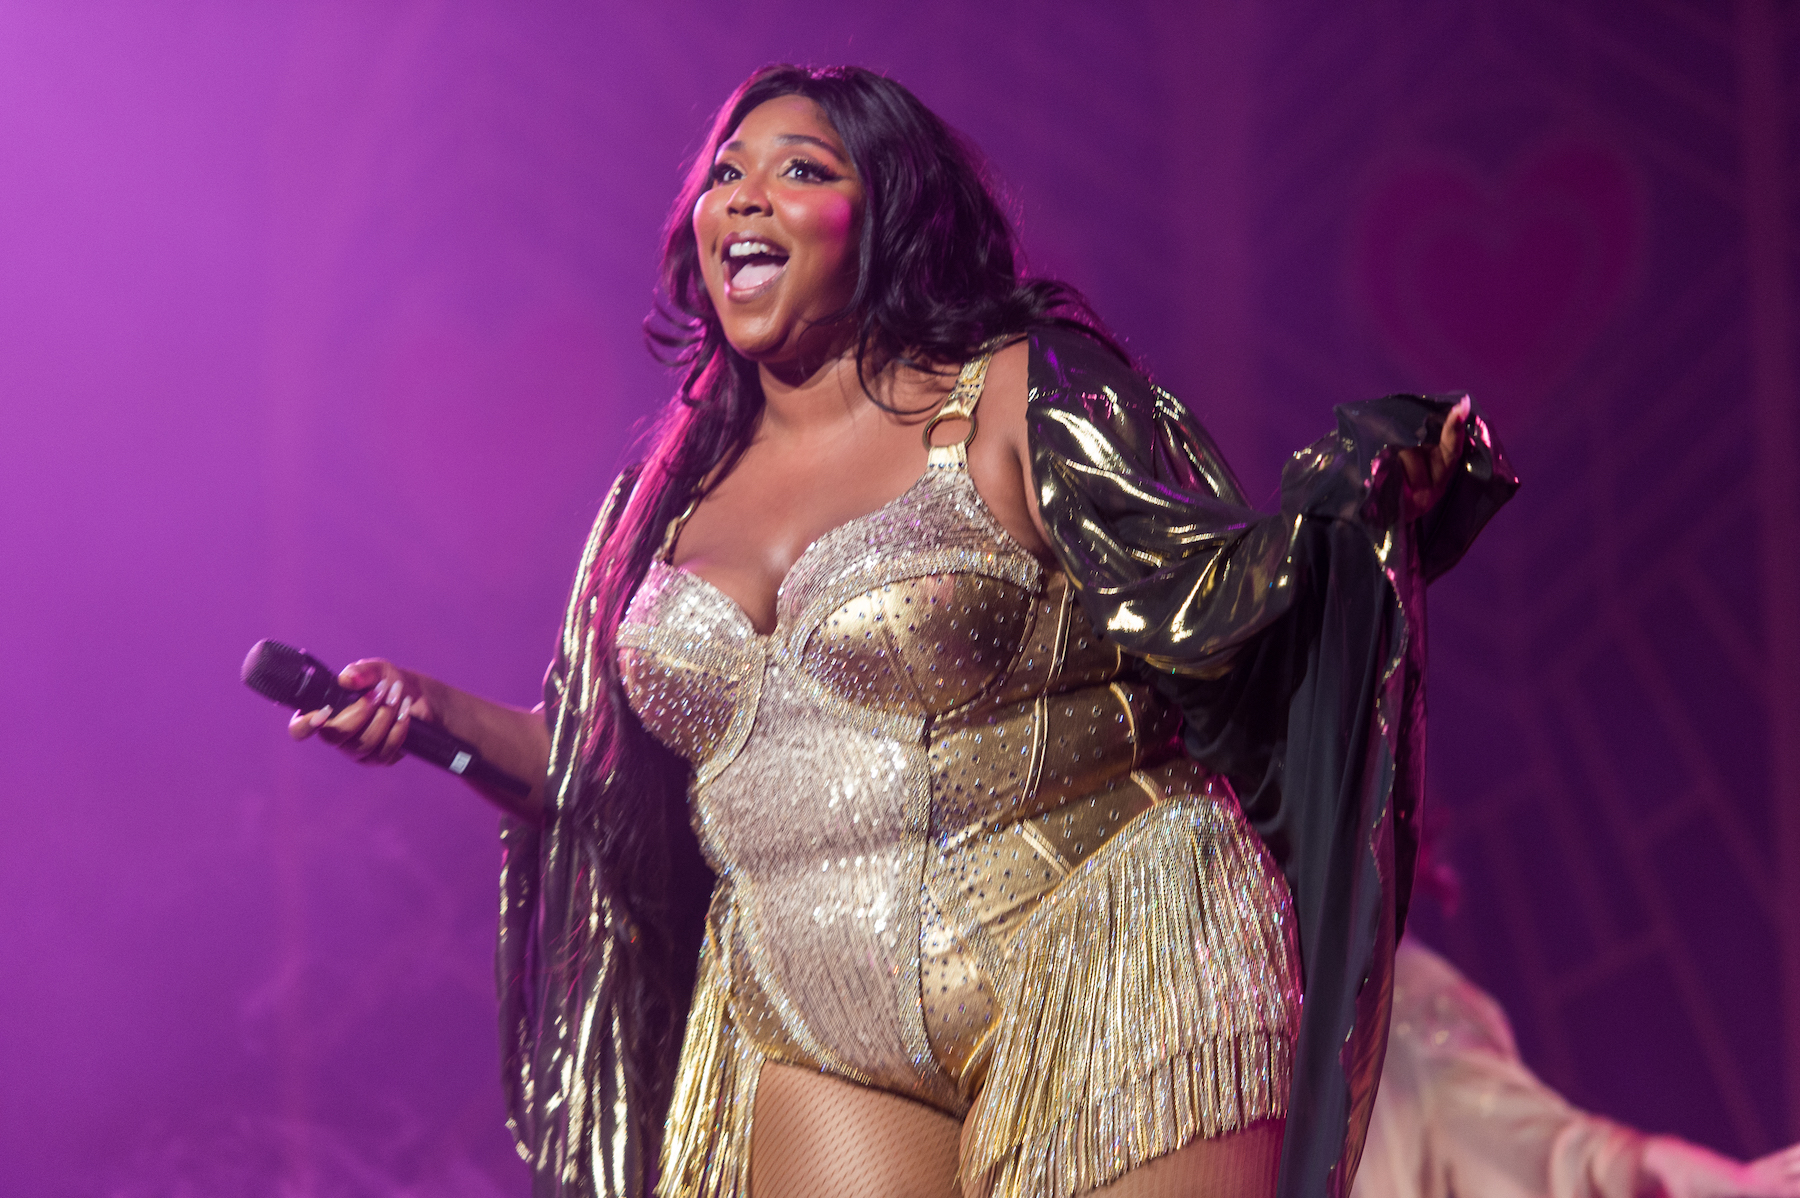 Lizzo performs during her 'Cuz I Love You Too Tour' at Radio City Music Hall